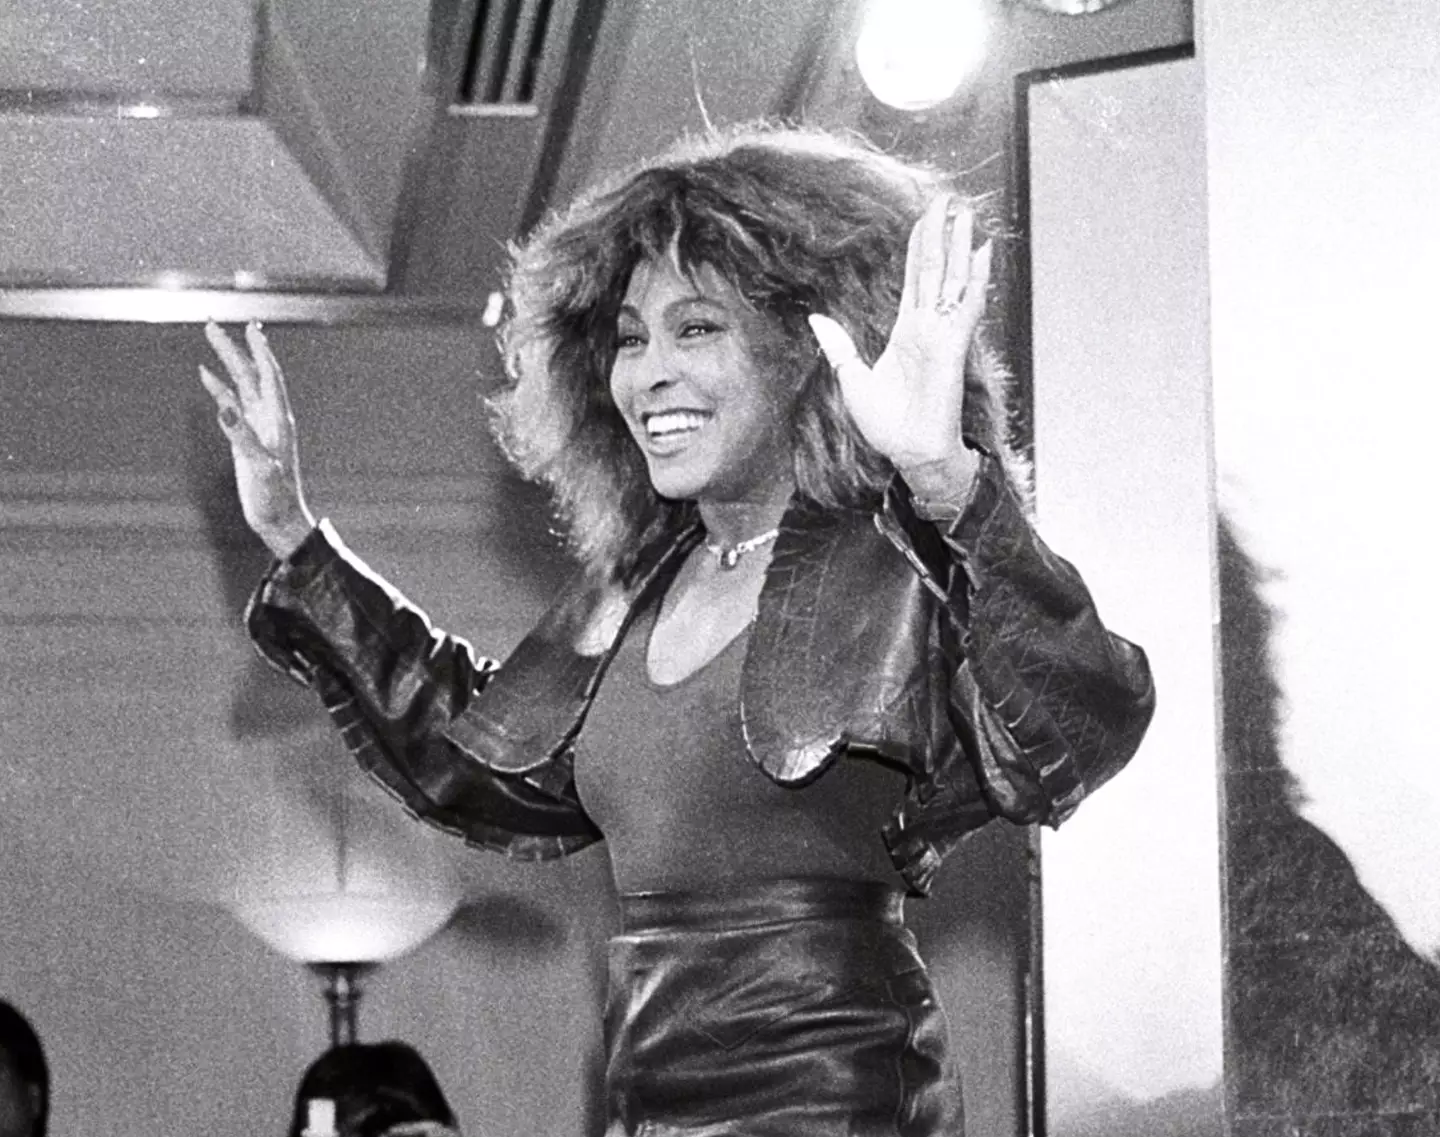 Tina Turner passed away at the age of 83 this week.